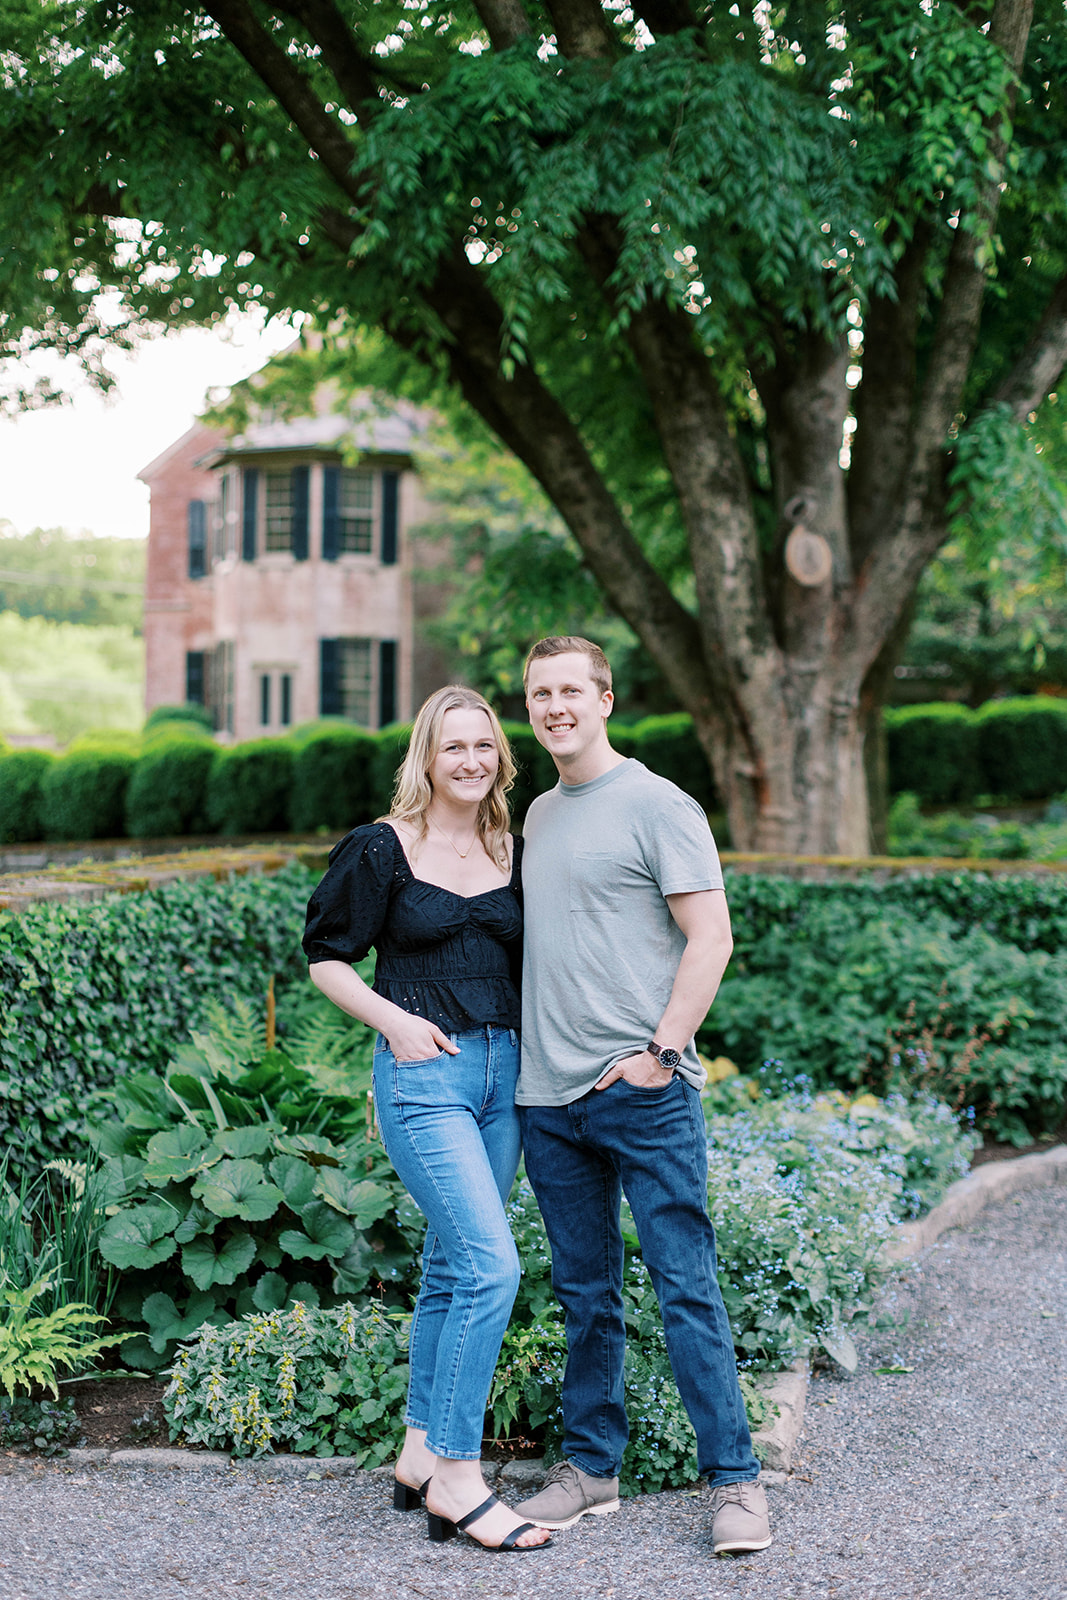 Conestoga House and Gardens was the perfect backdrop for an early spring engagemnet Session